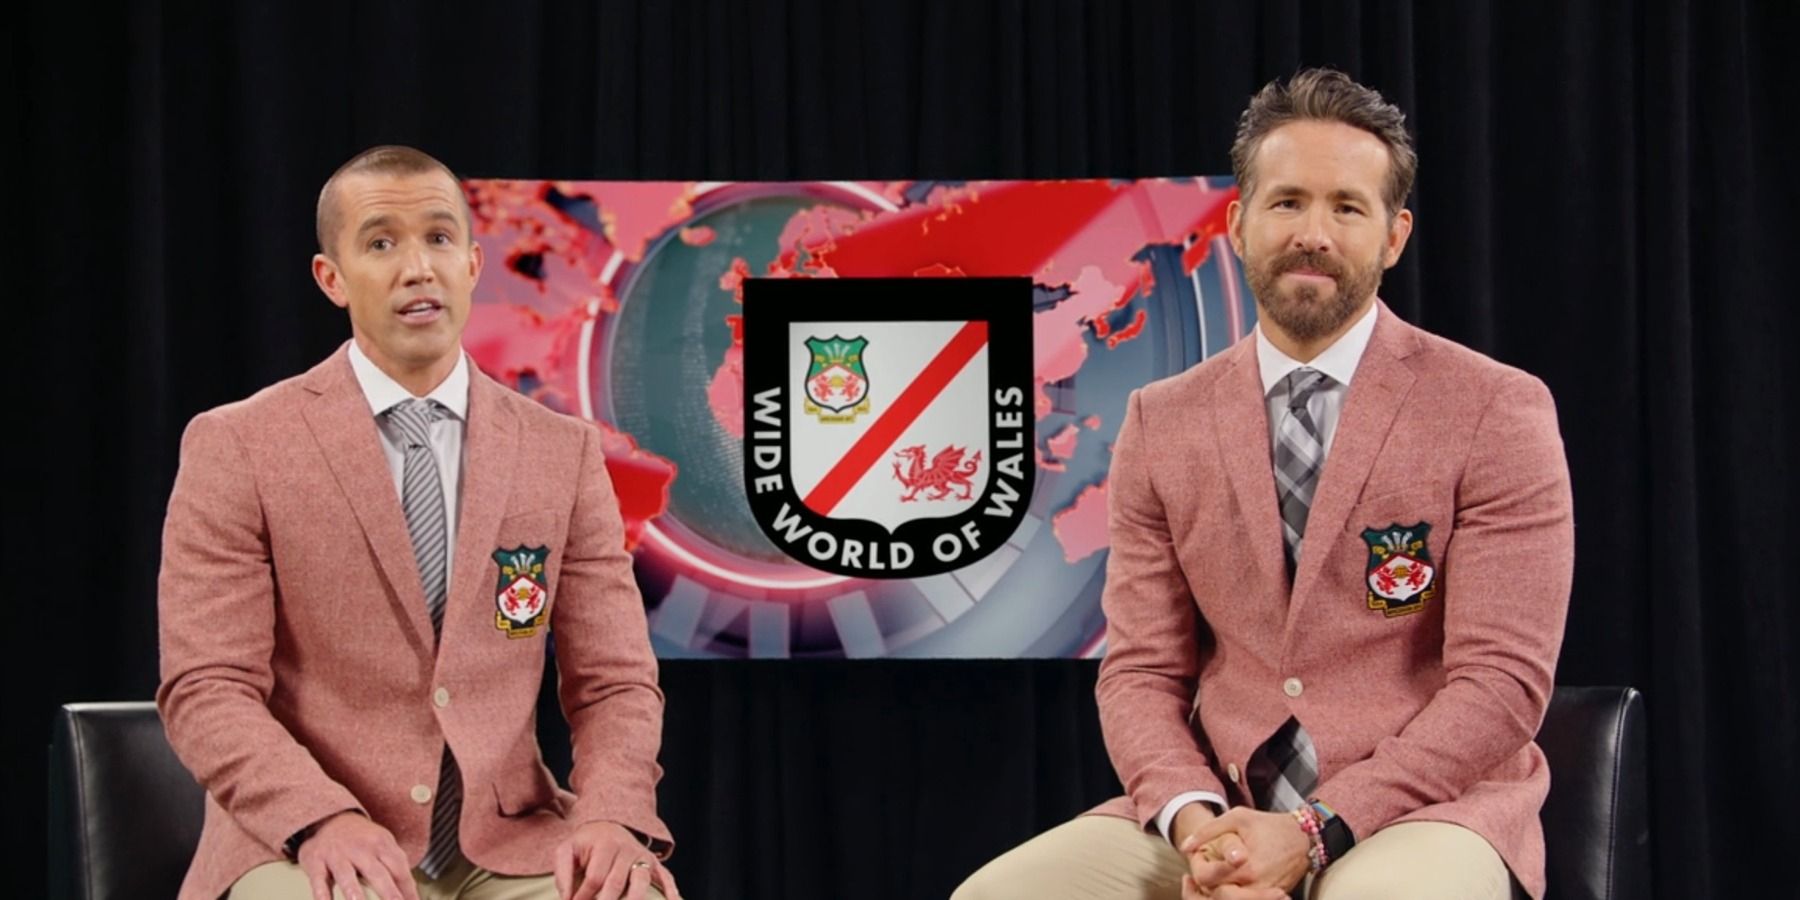 Rob McElhenney and Ryan Reynolds as Welcome to Wrexham presenters